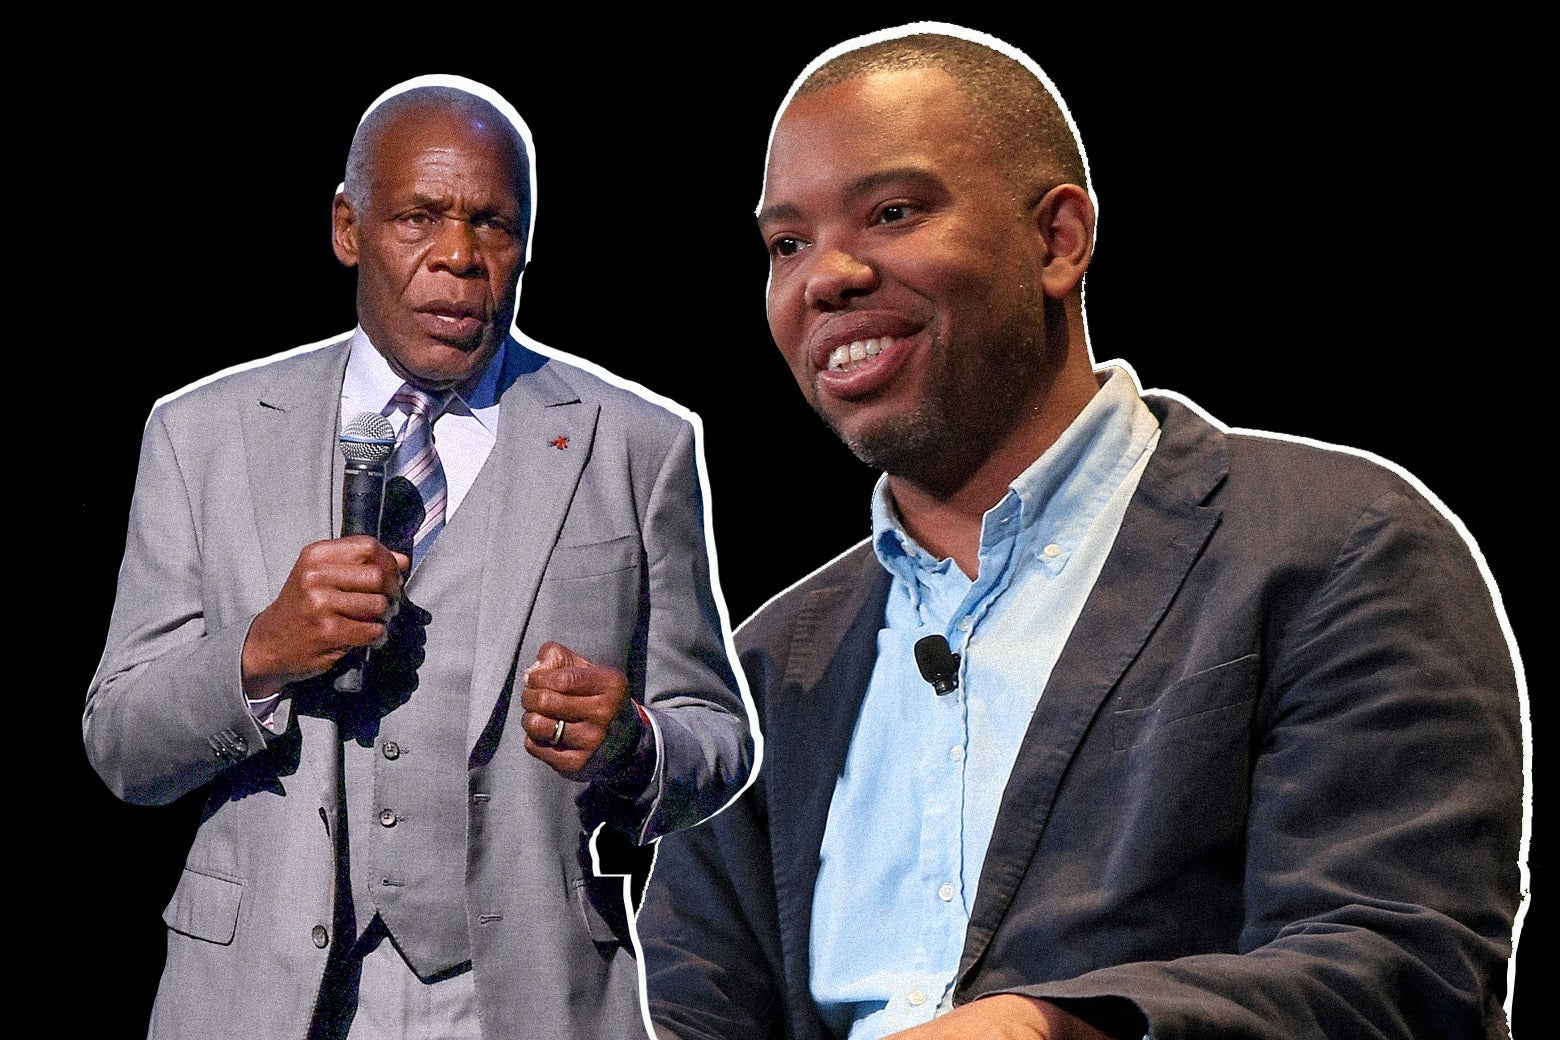 Danny Glover and Ta-Nehisi Coates.